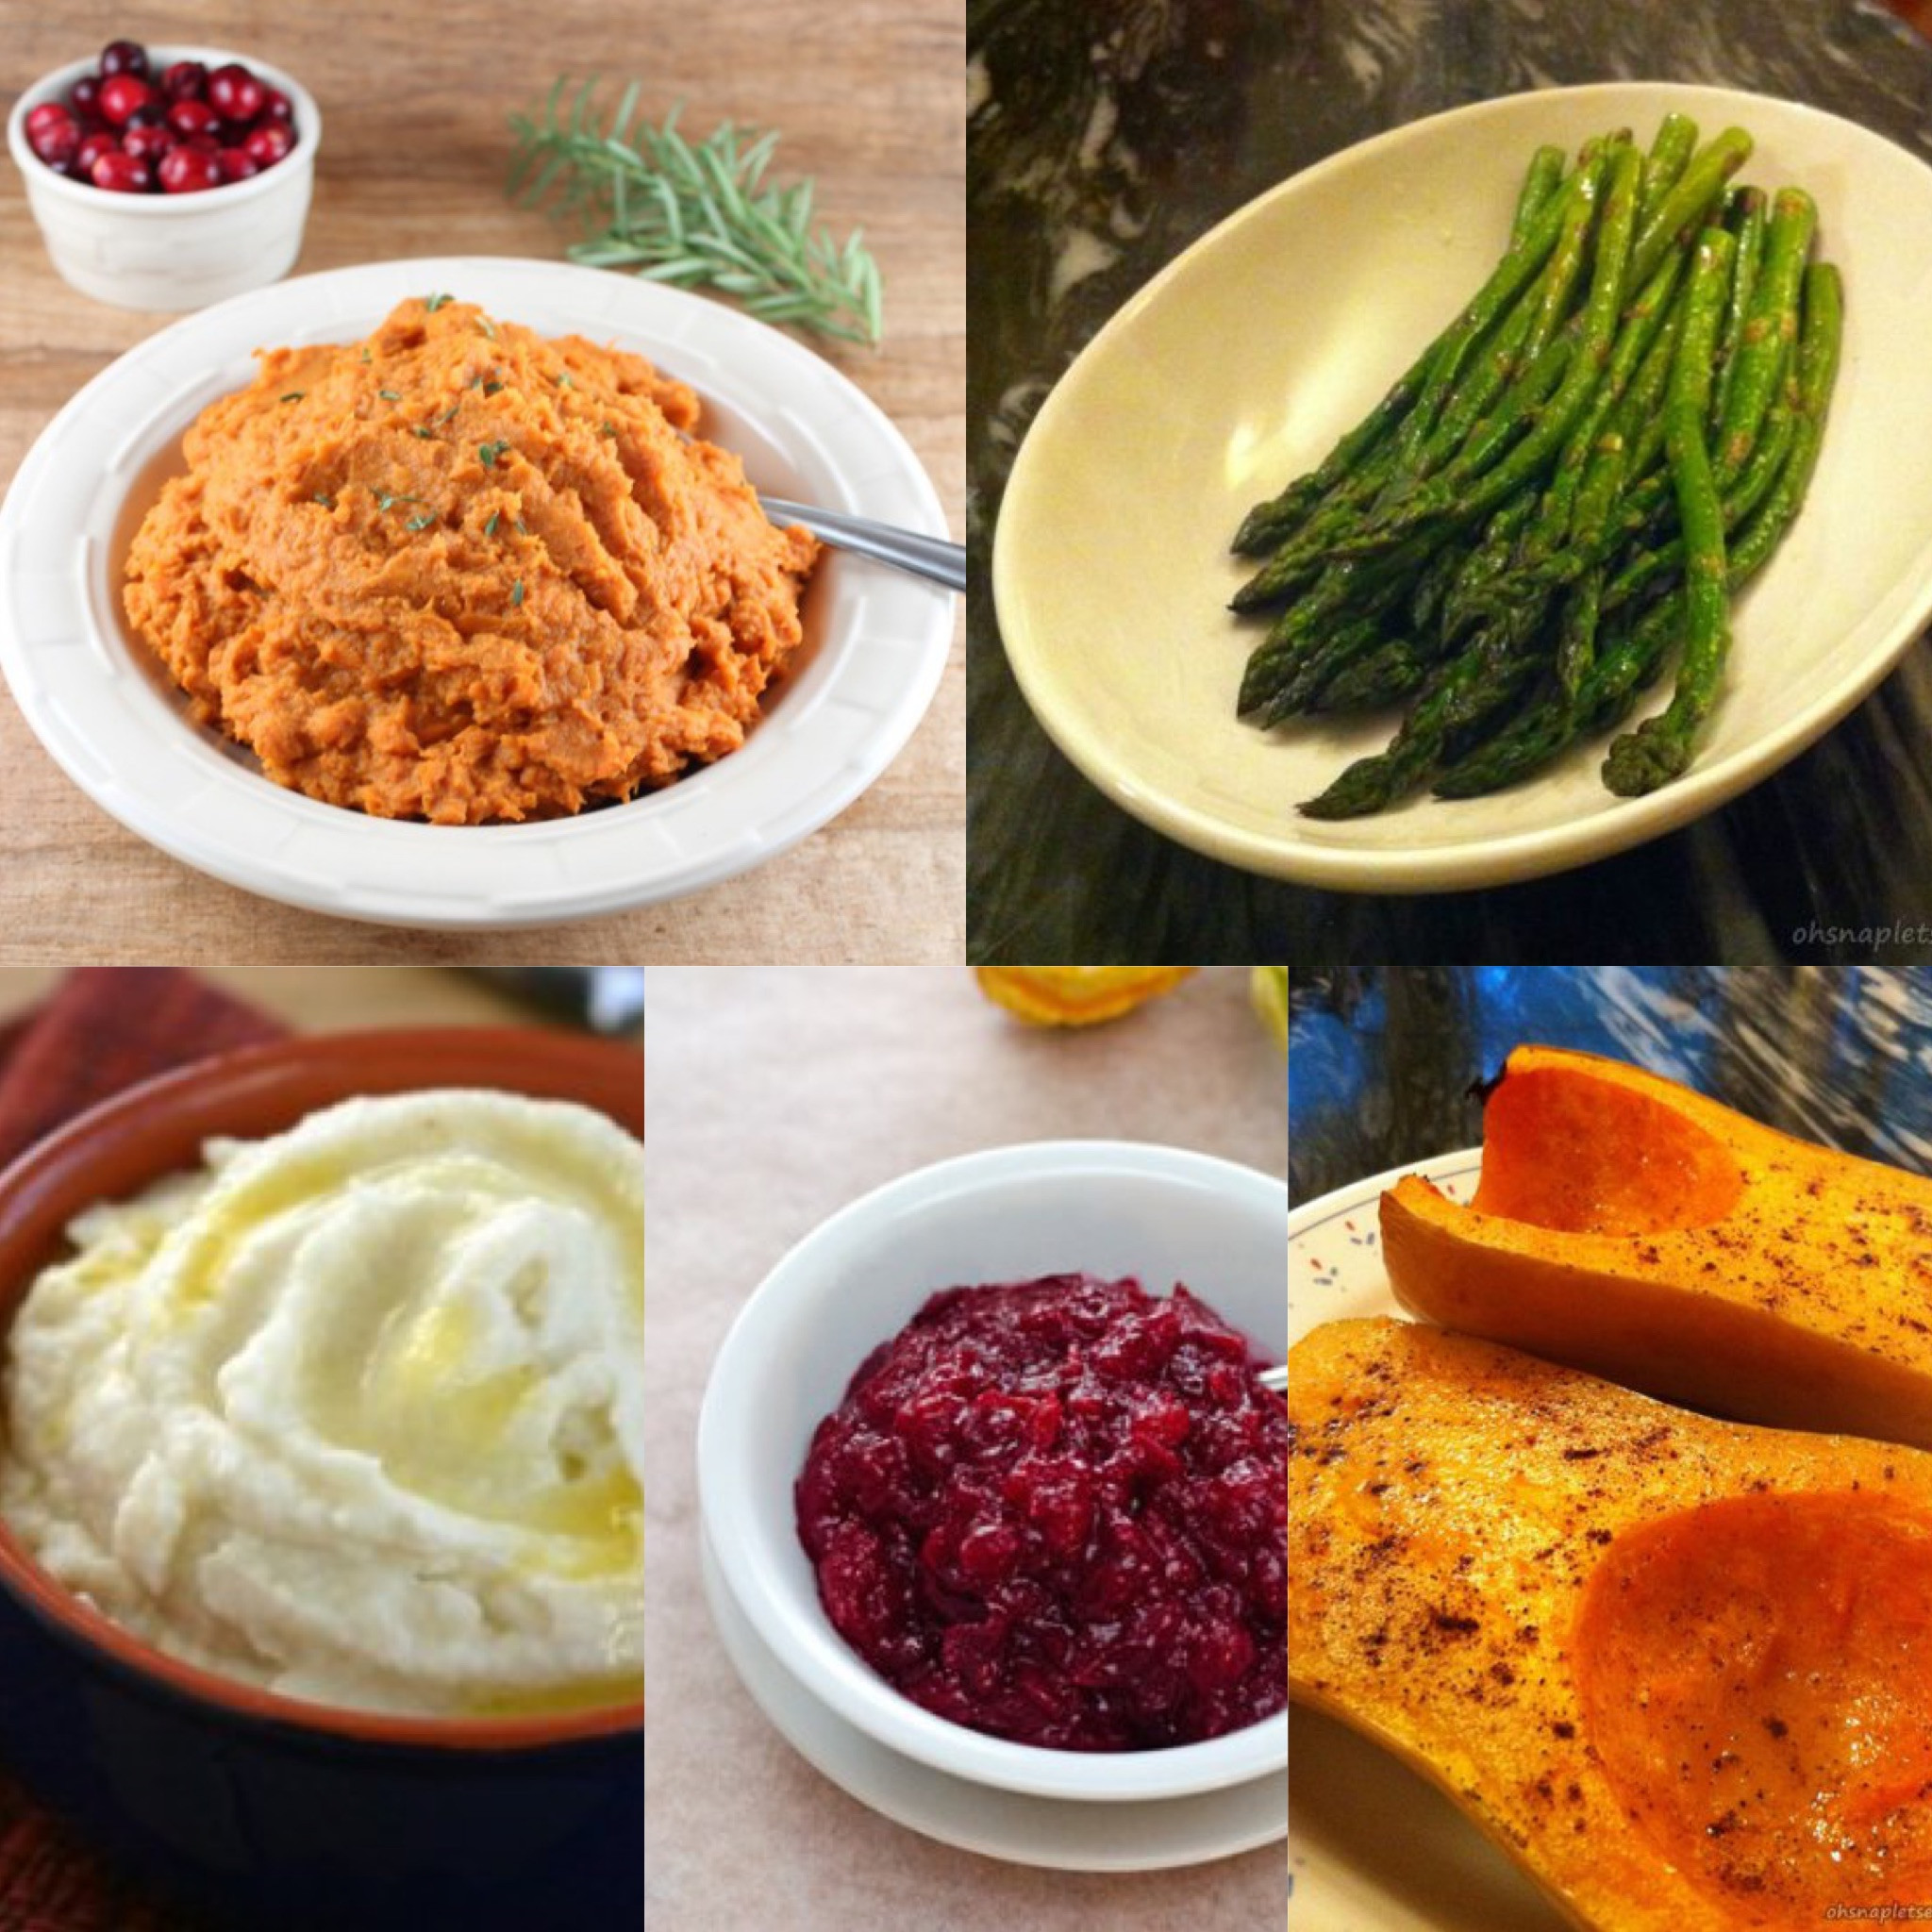 Paleo Thanksgiving Side Dishes
 Healthy and Paleo Thanksgiving Christmas Side Dishes To